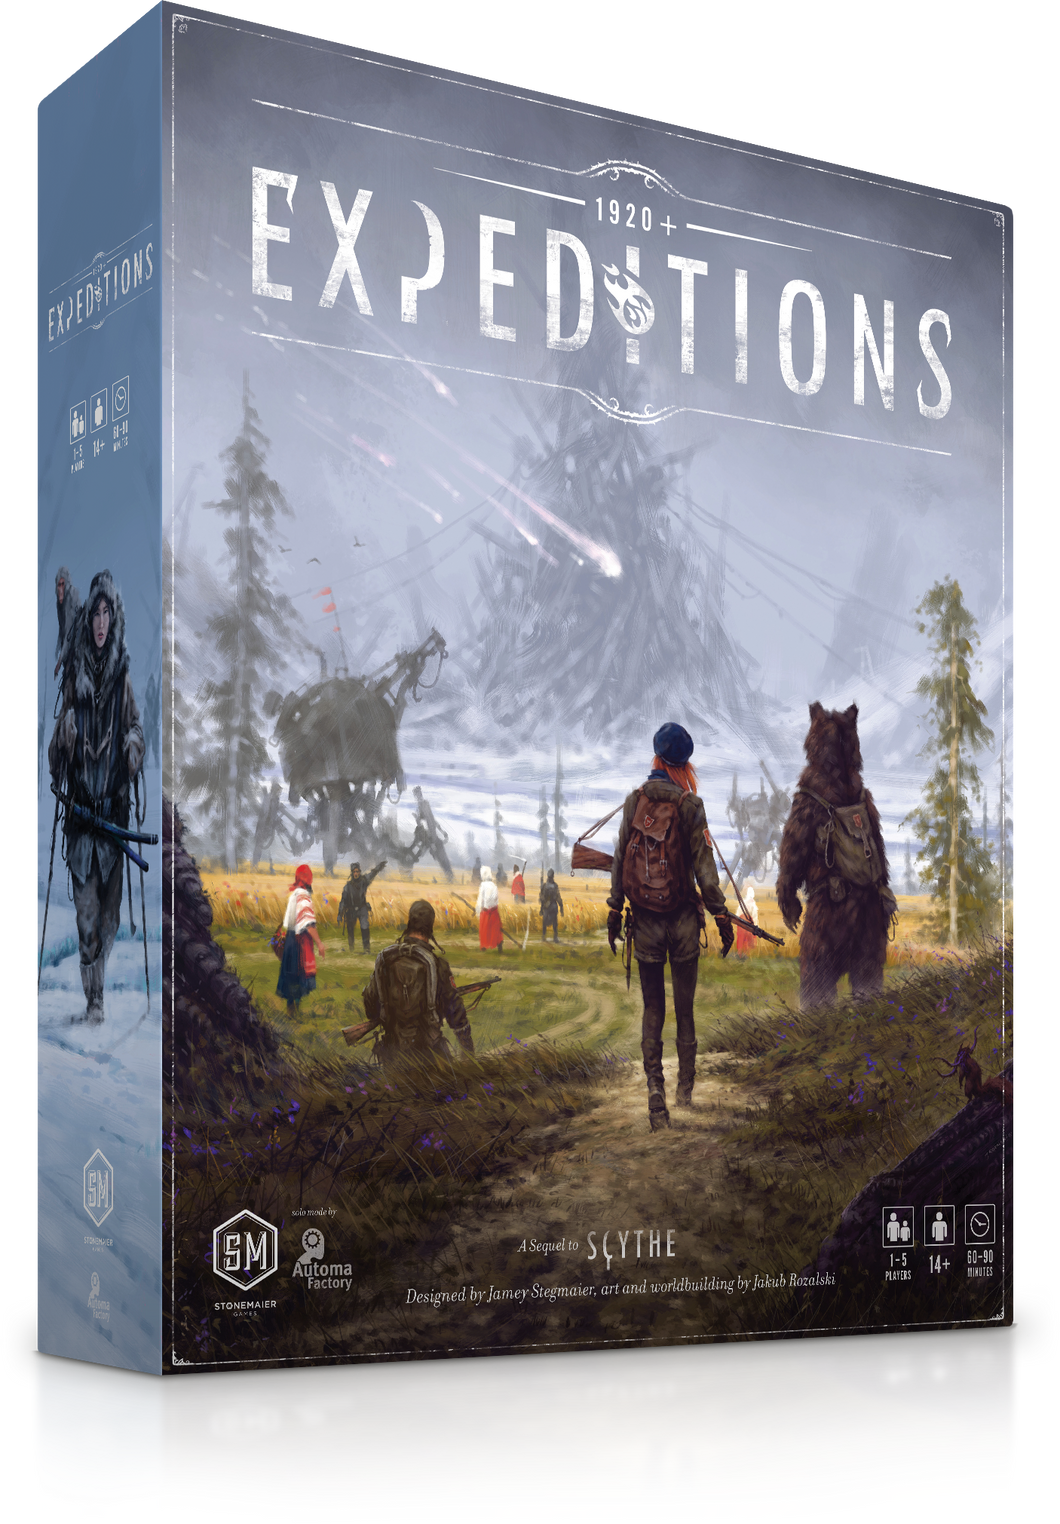 Expeditions (Standard Edition)